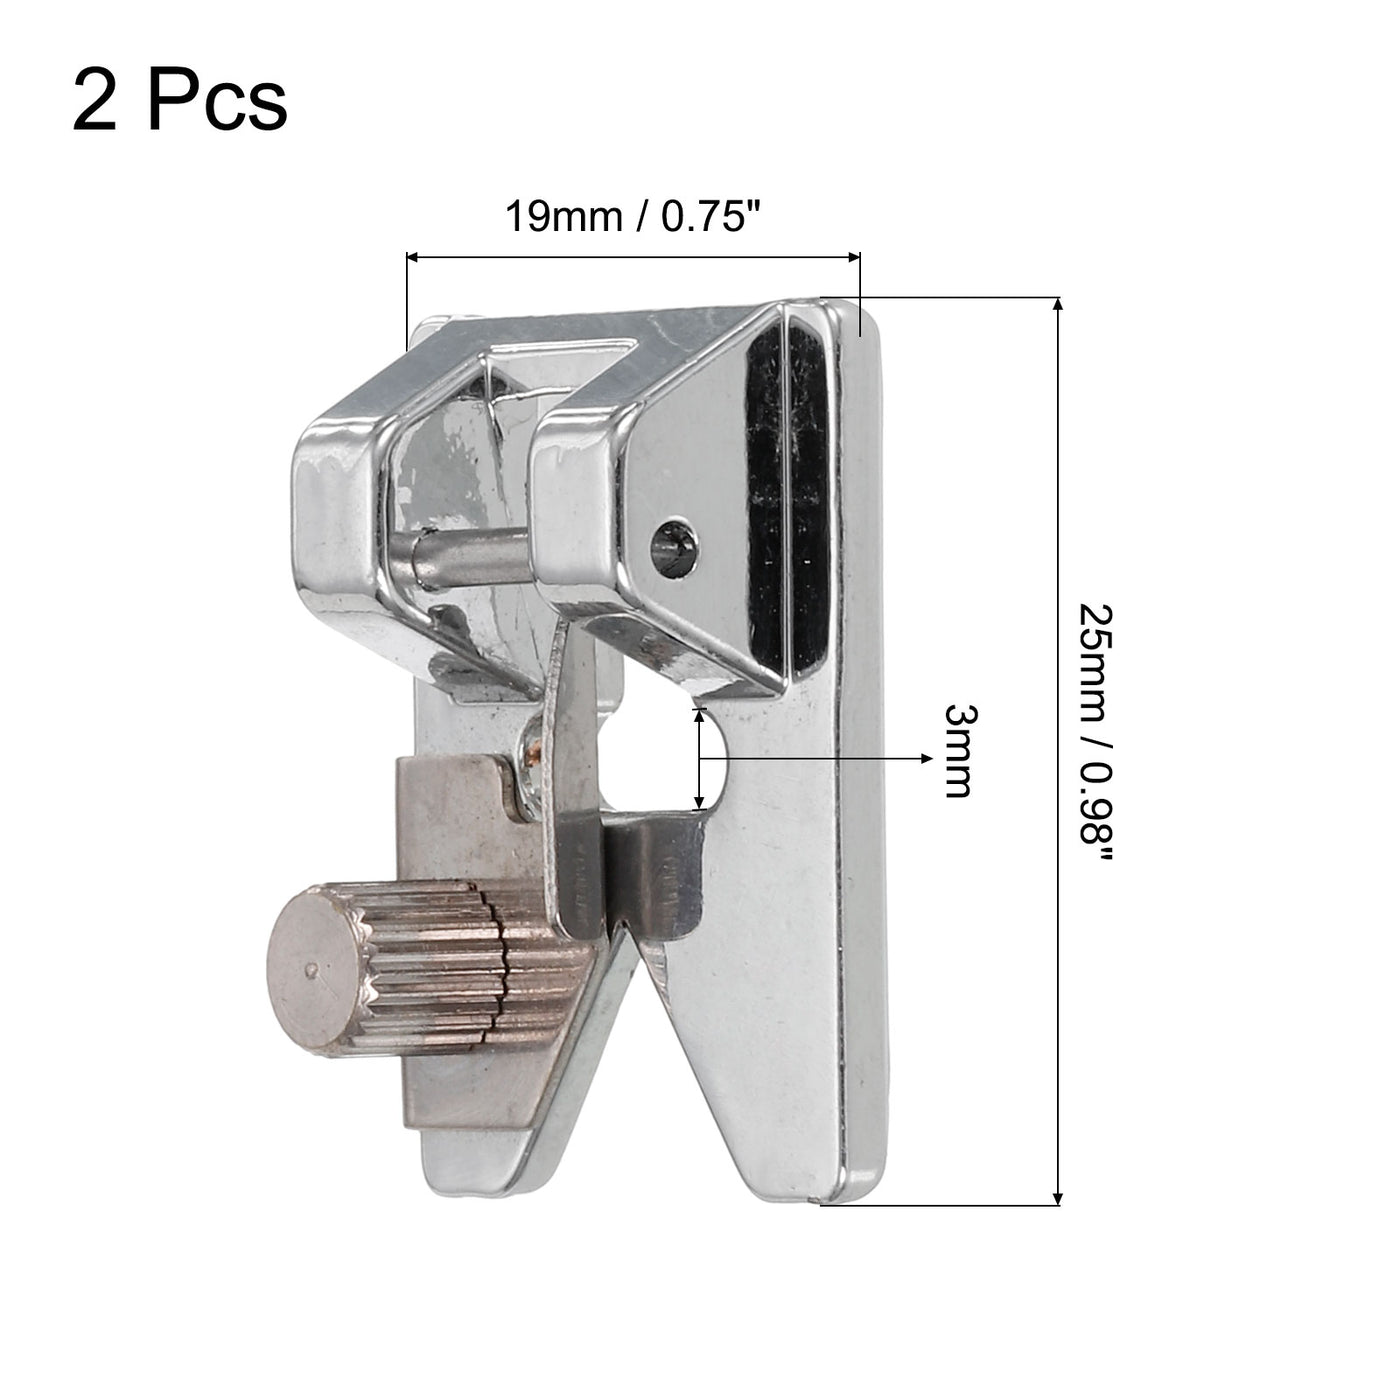 uxcell Uxcell Fringe Foot Sewing Machine Foot Iron Presser Foot